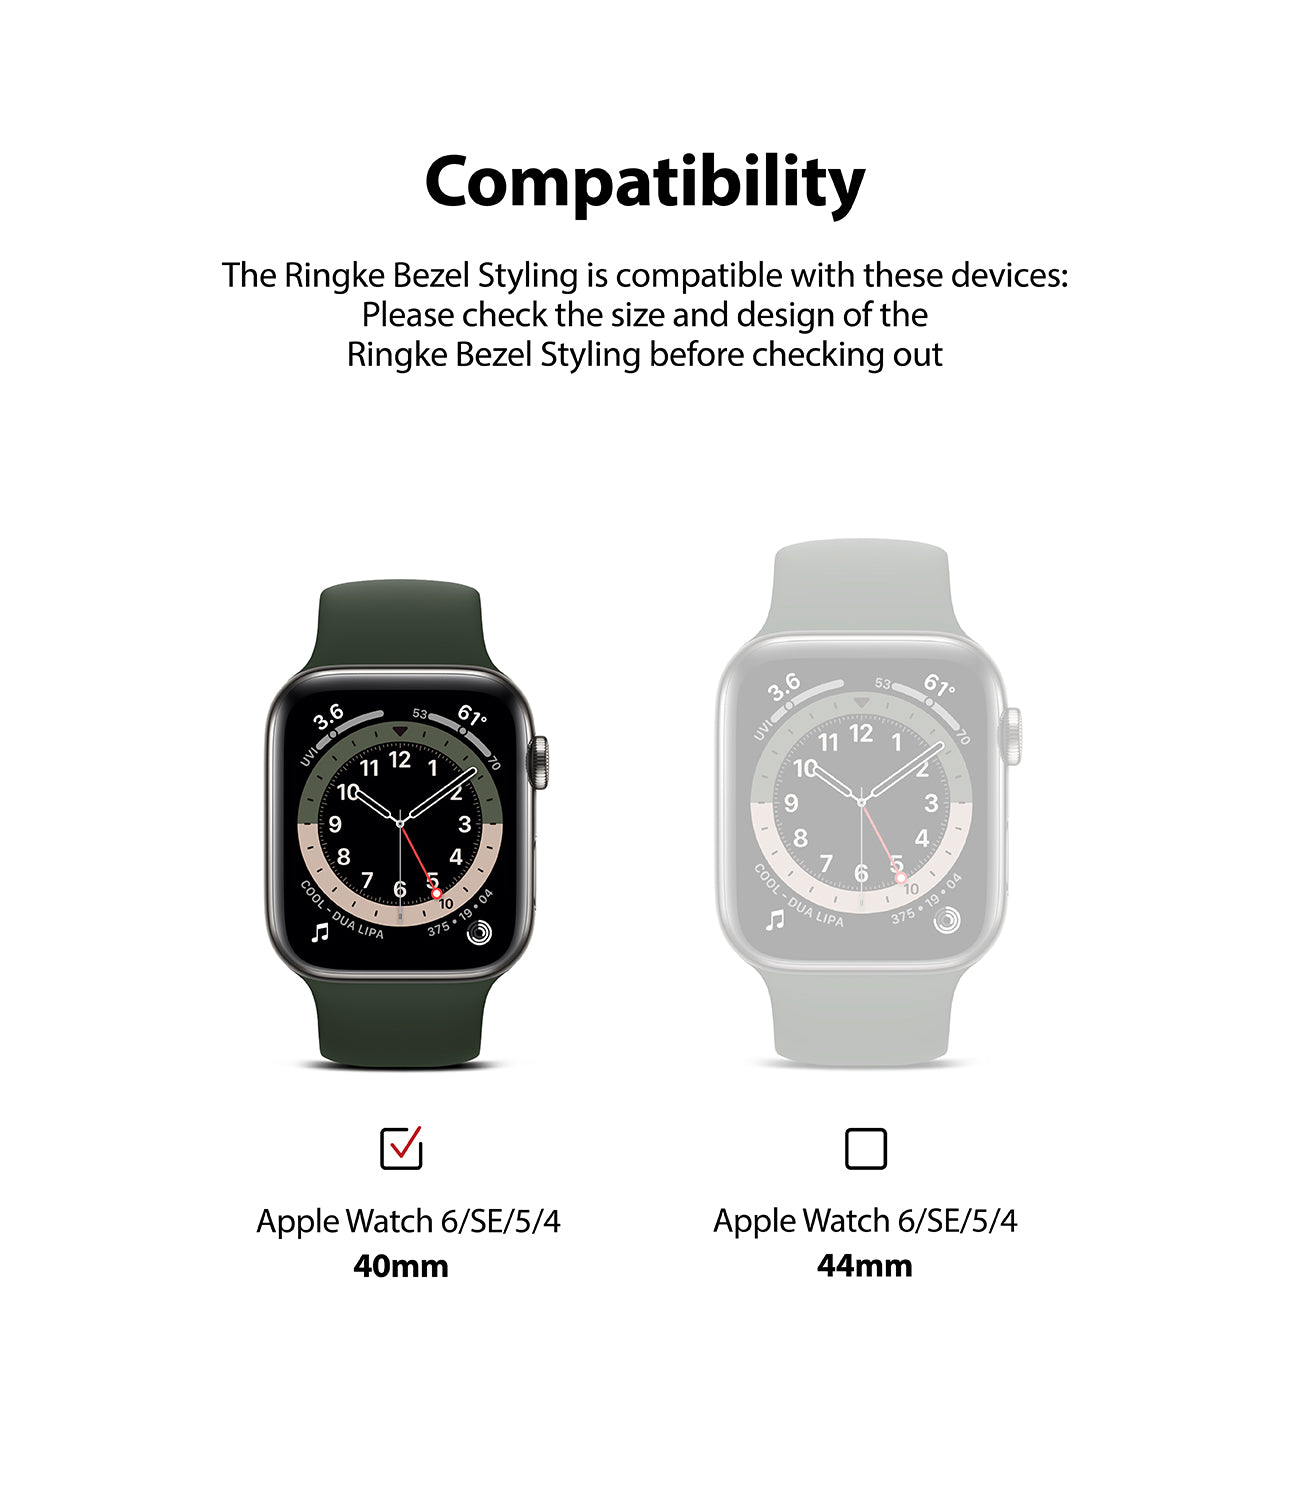 only compatible with apple watch 40mm